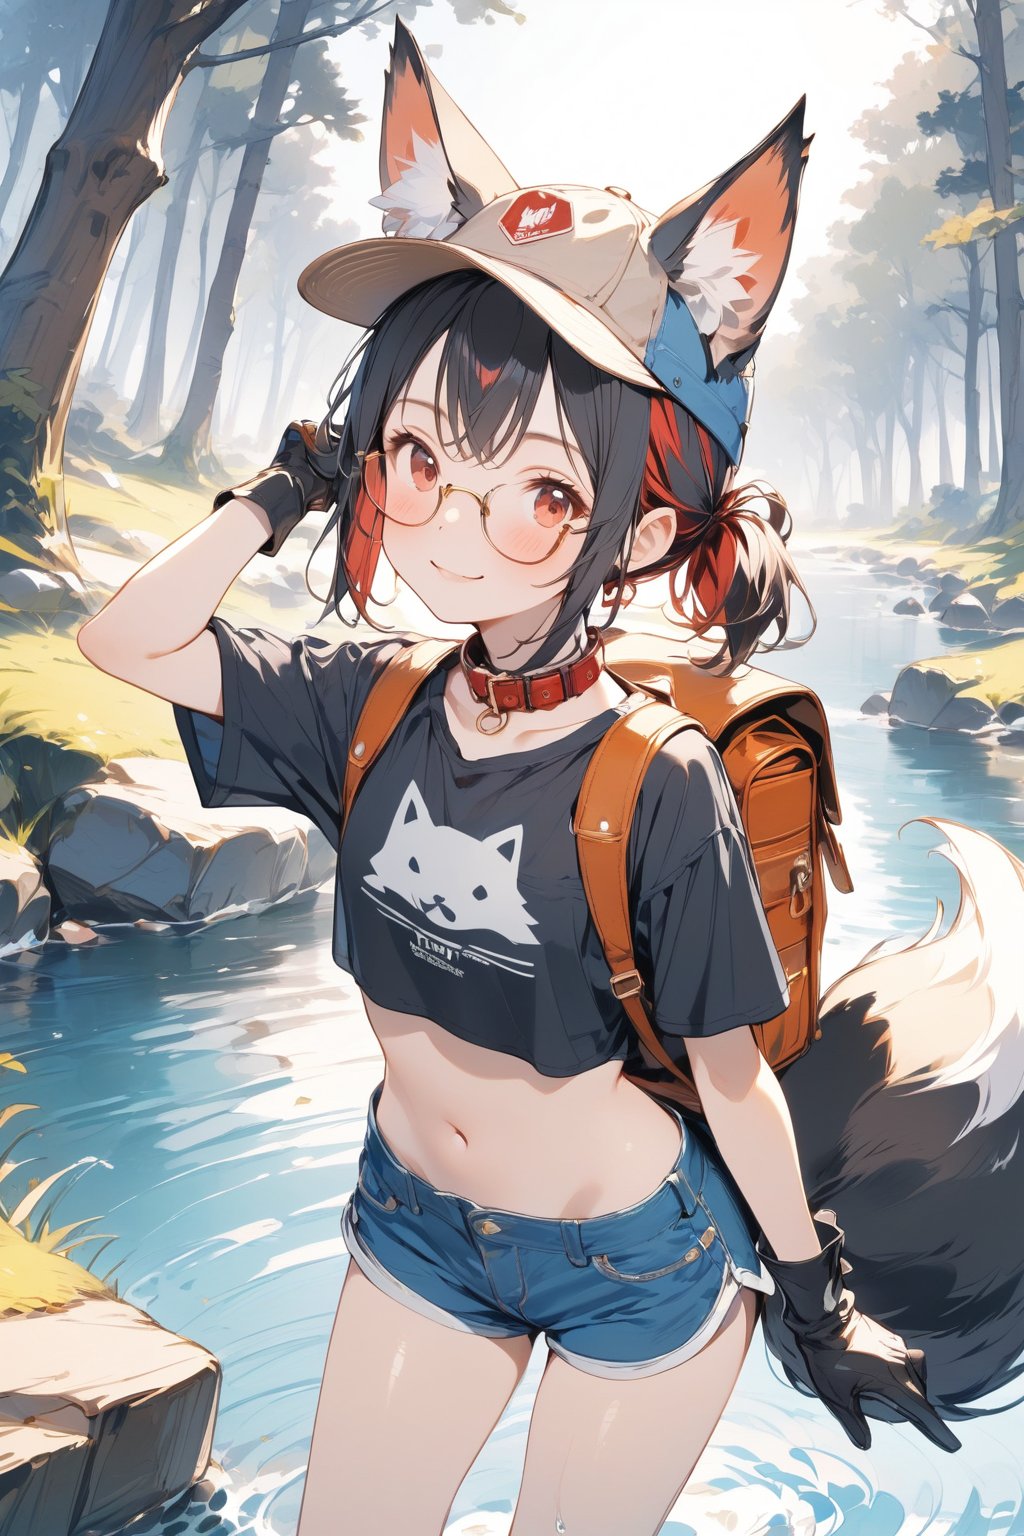 //quality, masterpiece:1.4, detailed:1.4, ,best quality:1.4, //, 1girl,solo,Tekeli,//,black fox ears,animal ear fluff,(black fox tail),black hair,red inner hair,(short ponytail),sidelocks,red eyes, navel,//,fashion,(adventure costume),red_glasses,adventure hat,cat_collar,(camouflage),short_sleeves,fox patterns,blue mini shorts, gloves, boots,adventure rucksack,//,blush, smile,looking_at_viewer,//,outdoors,forest,water,close_up